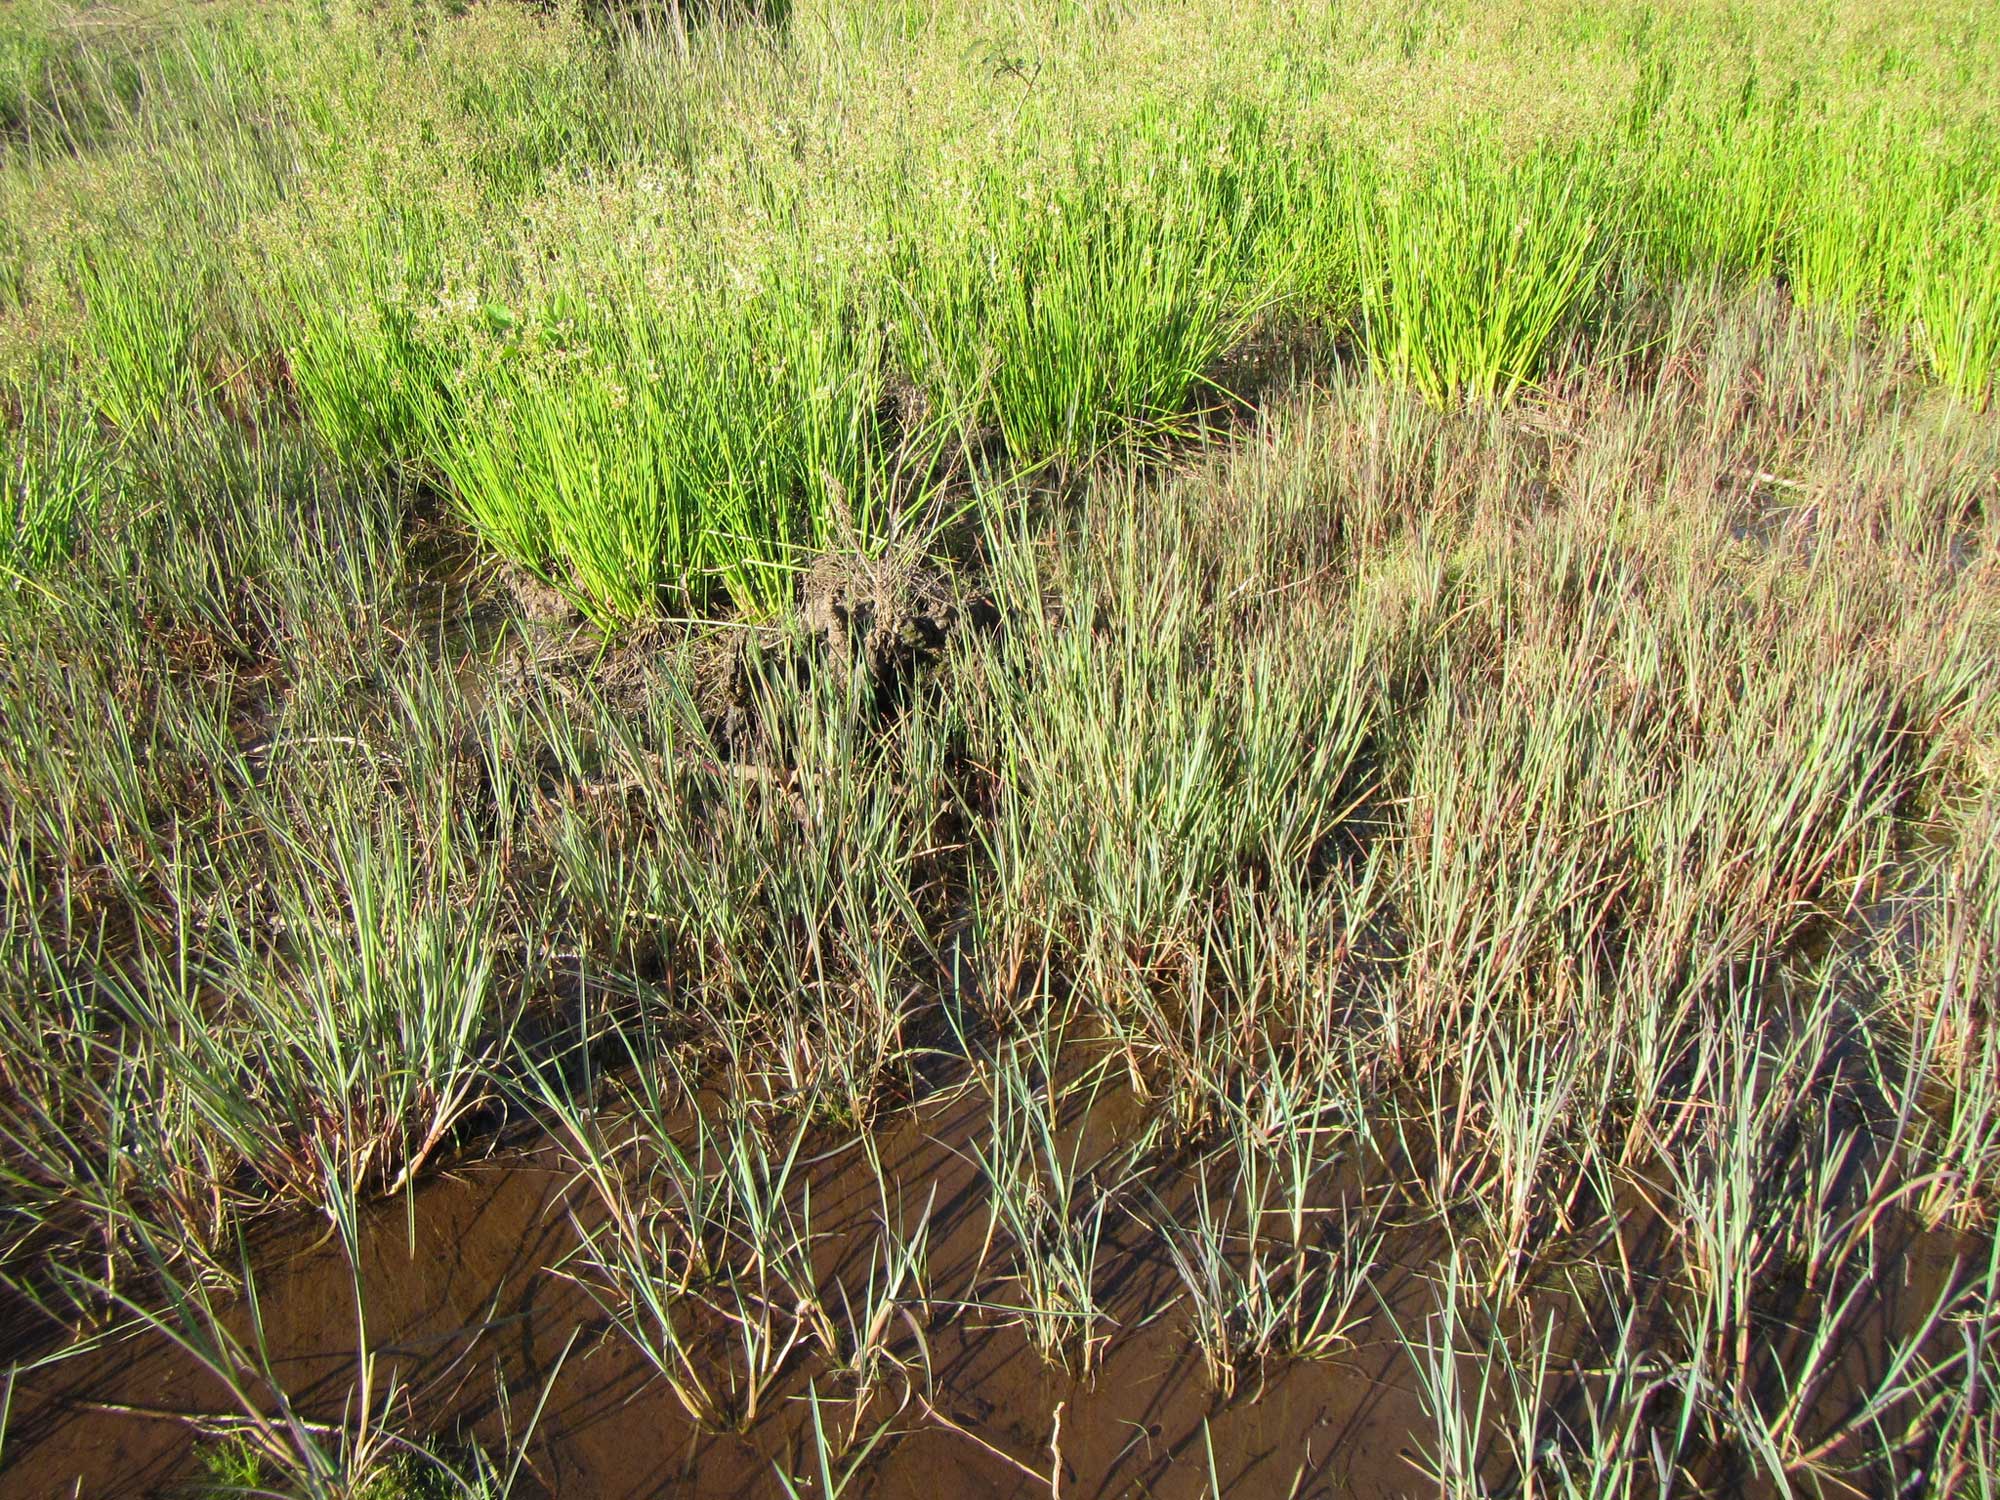 Photograph of limpo grass growing in a wetland in South Africa. The photos shows grass growing in shallow, brown water.